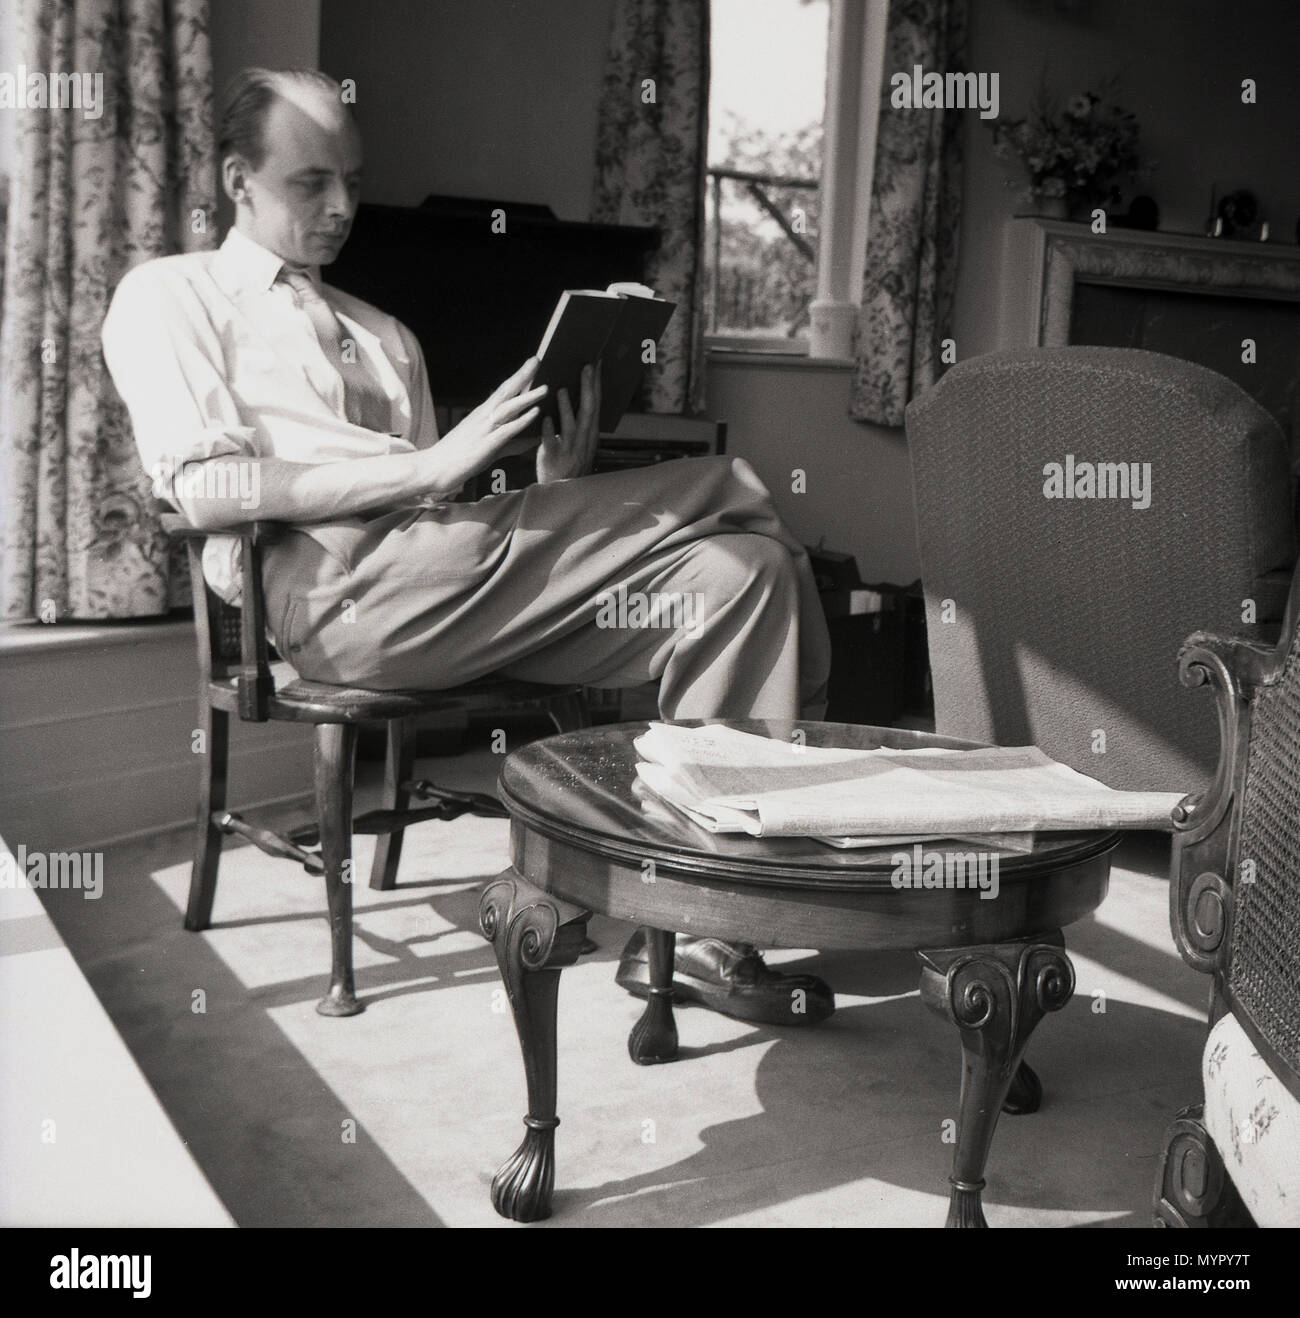 1953, July, an adult man, with an unusual hairstyle, sitting in a chair in a front room reading a book, England, UK. Stock Photo